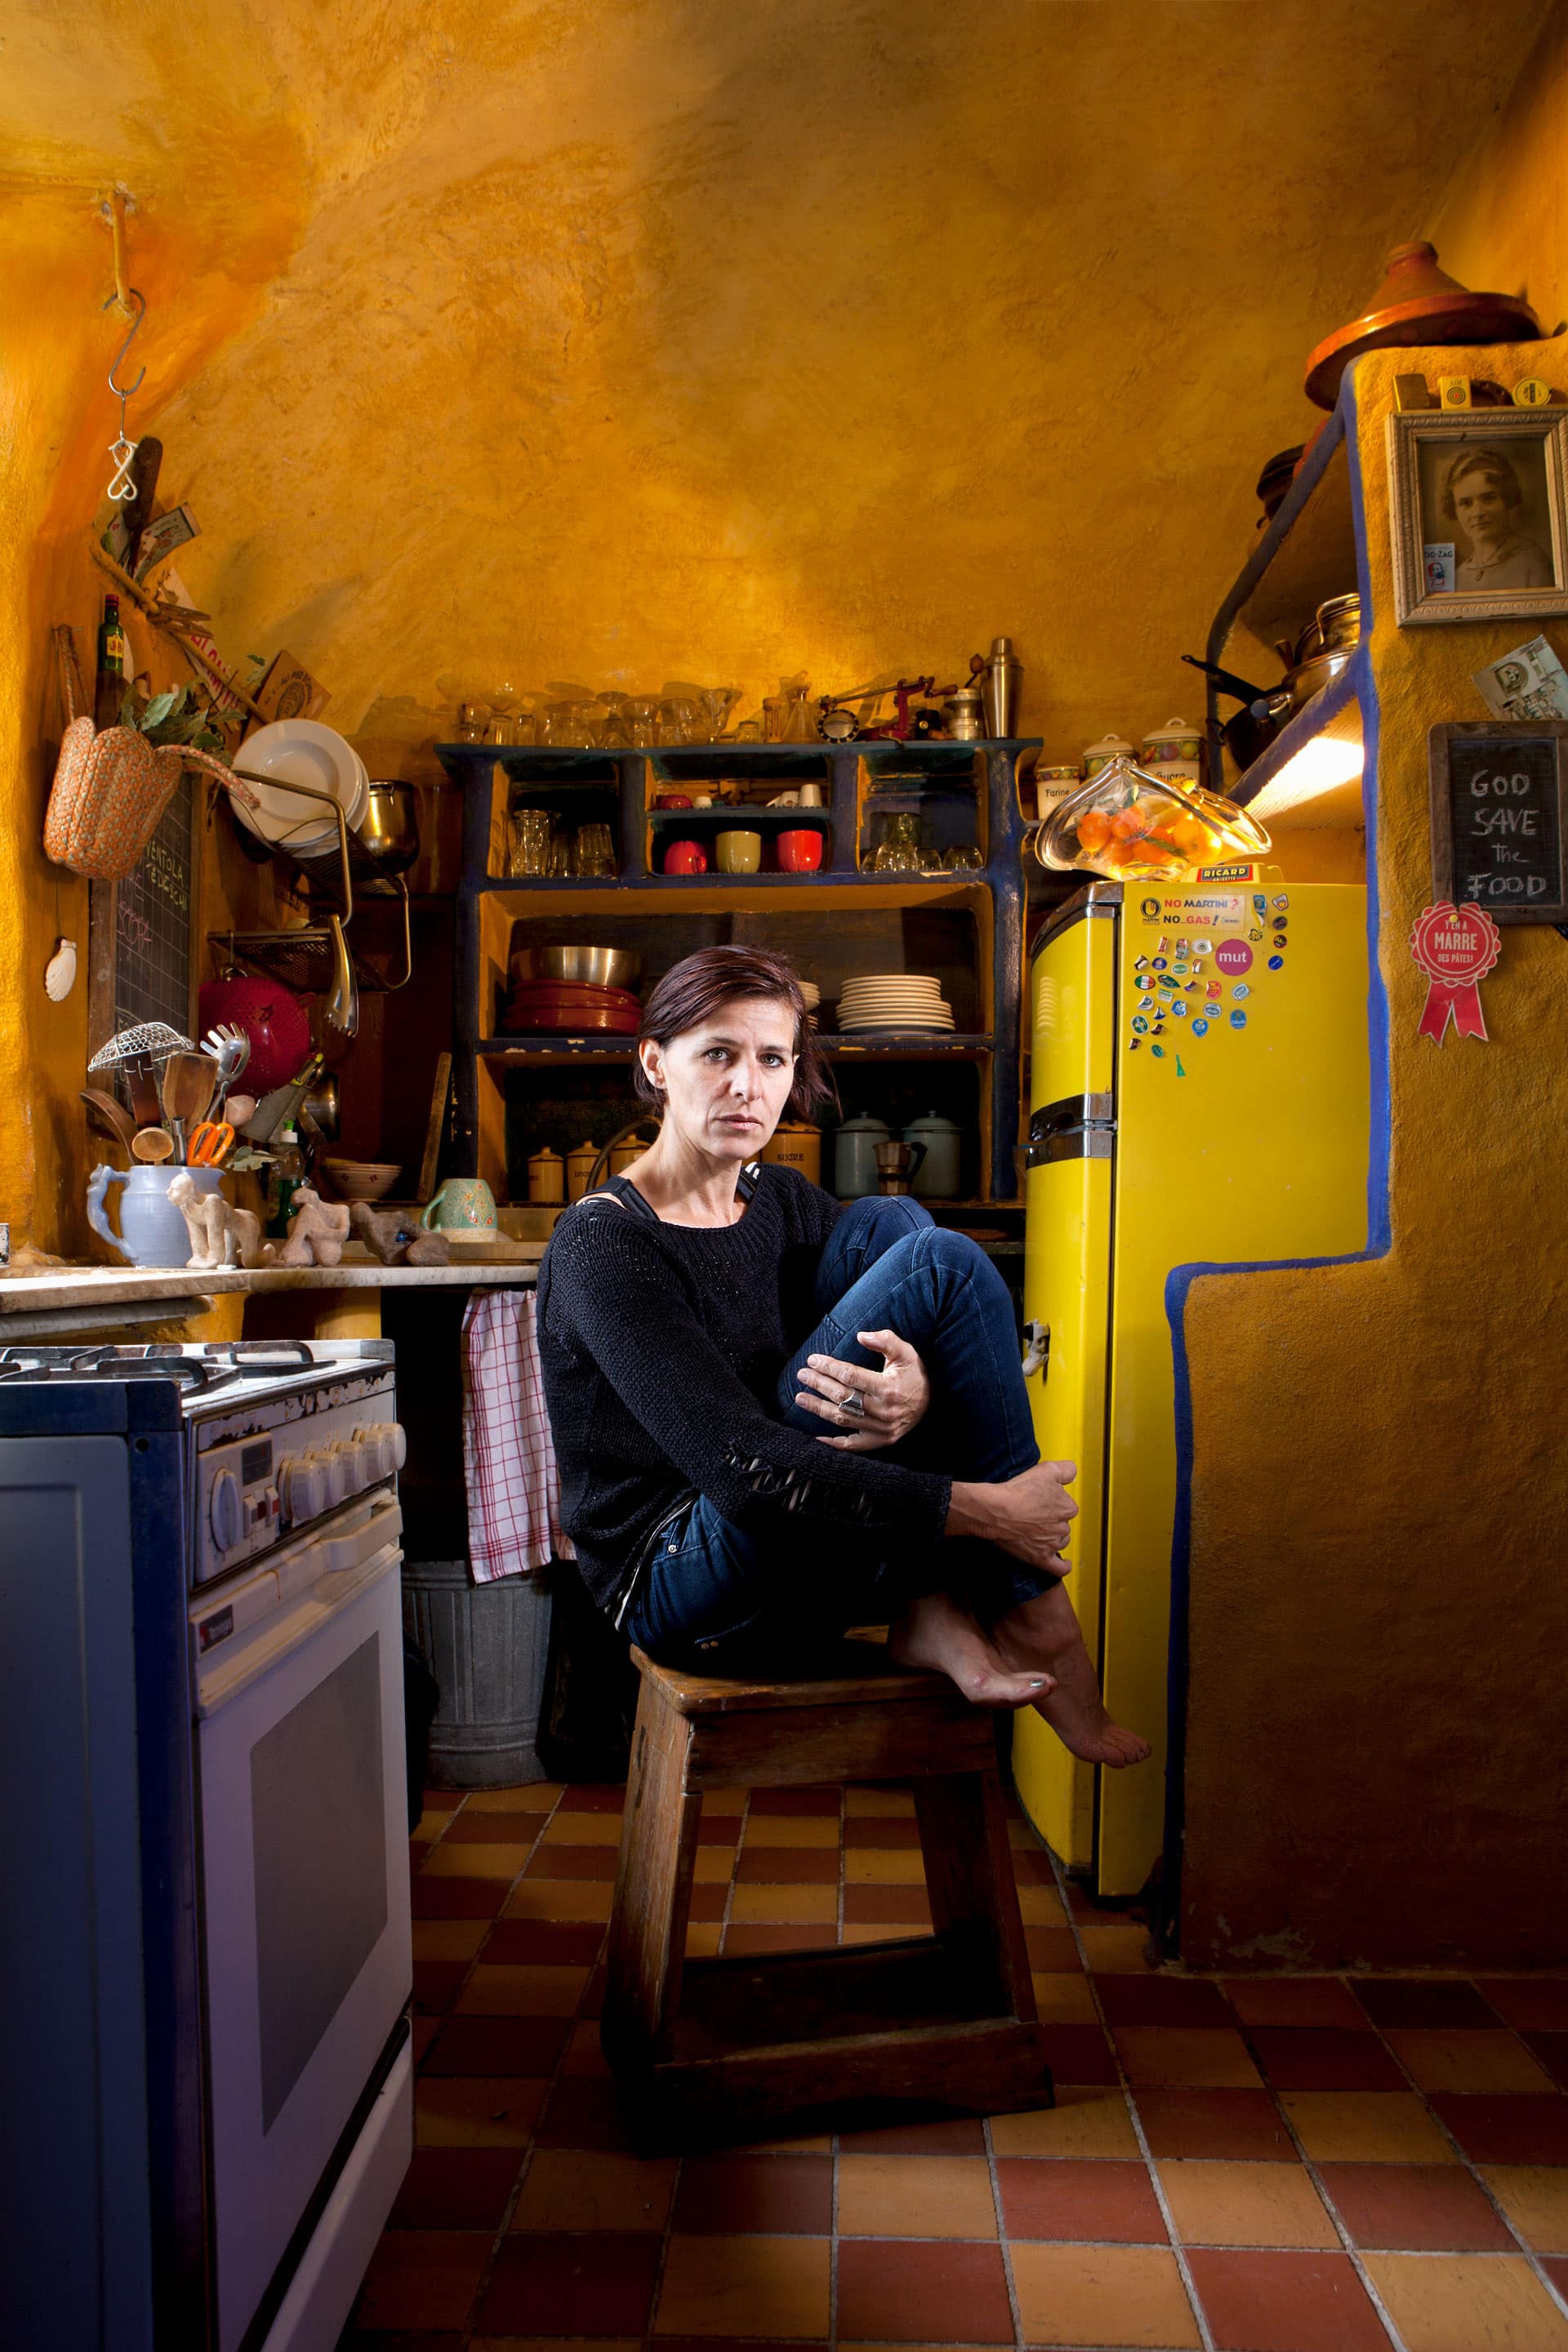 A woman hugs her knees sitting on a low wooden stool in a yellow kitchen